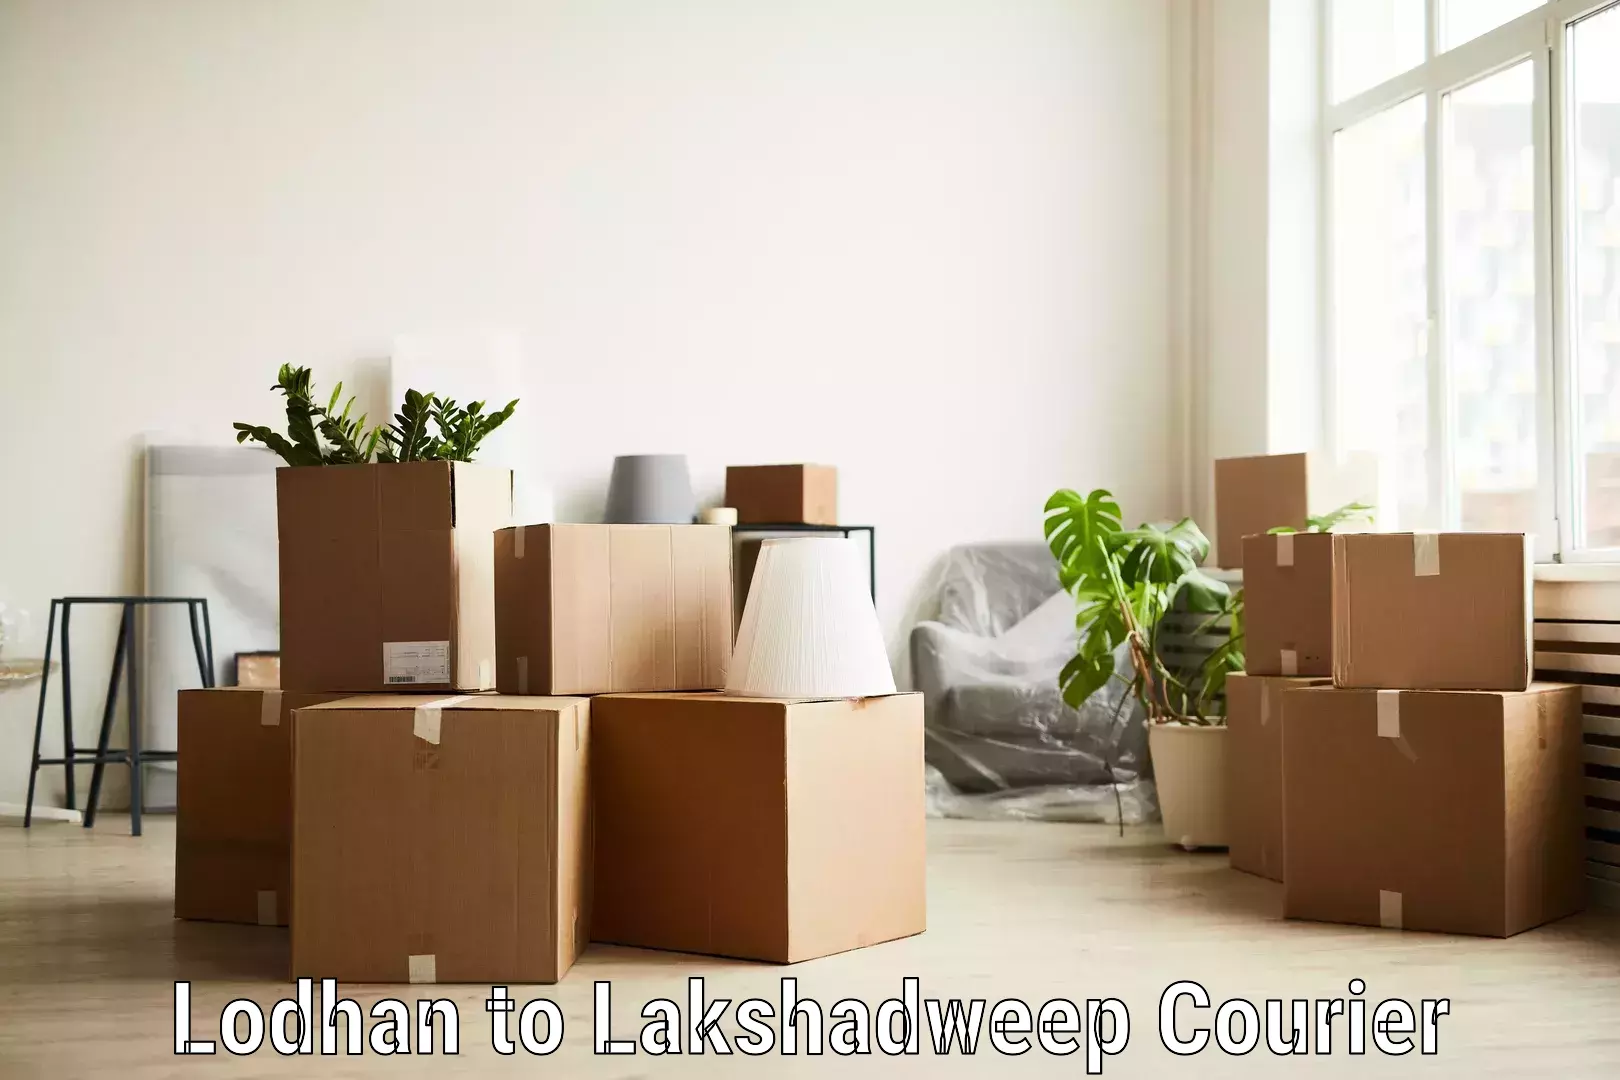 End-to-end delivery Lodhan to Lakshadweep